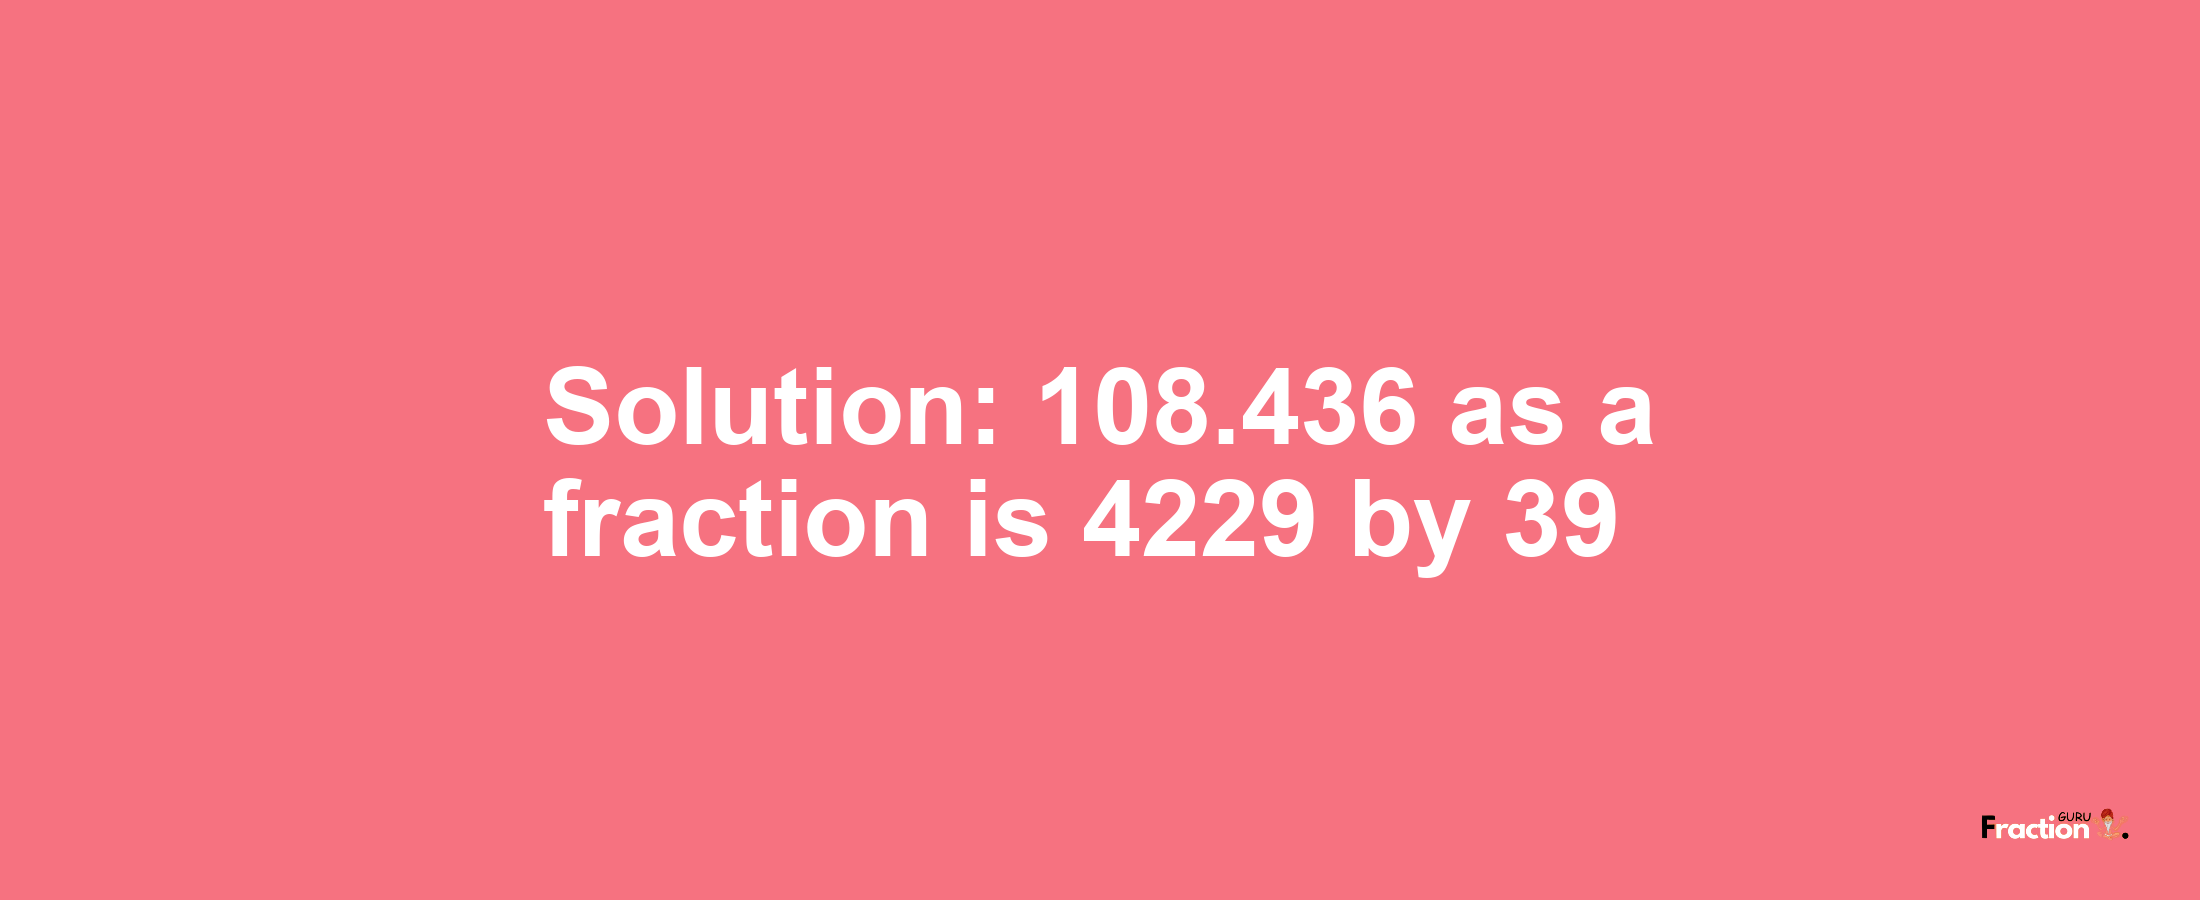 Solution:108.436 as a fraction is 4229/39